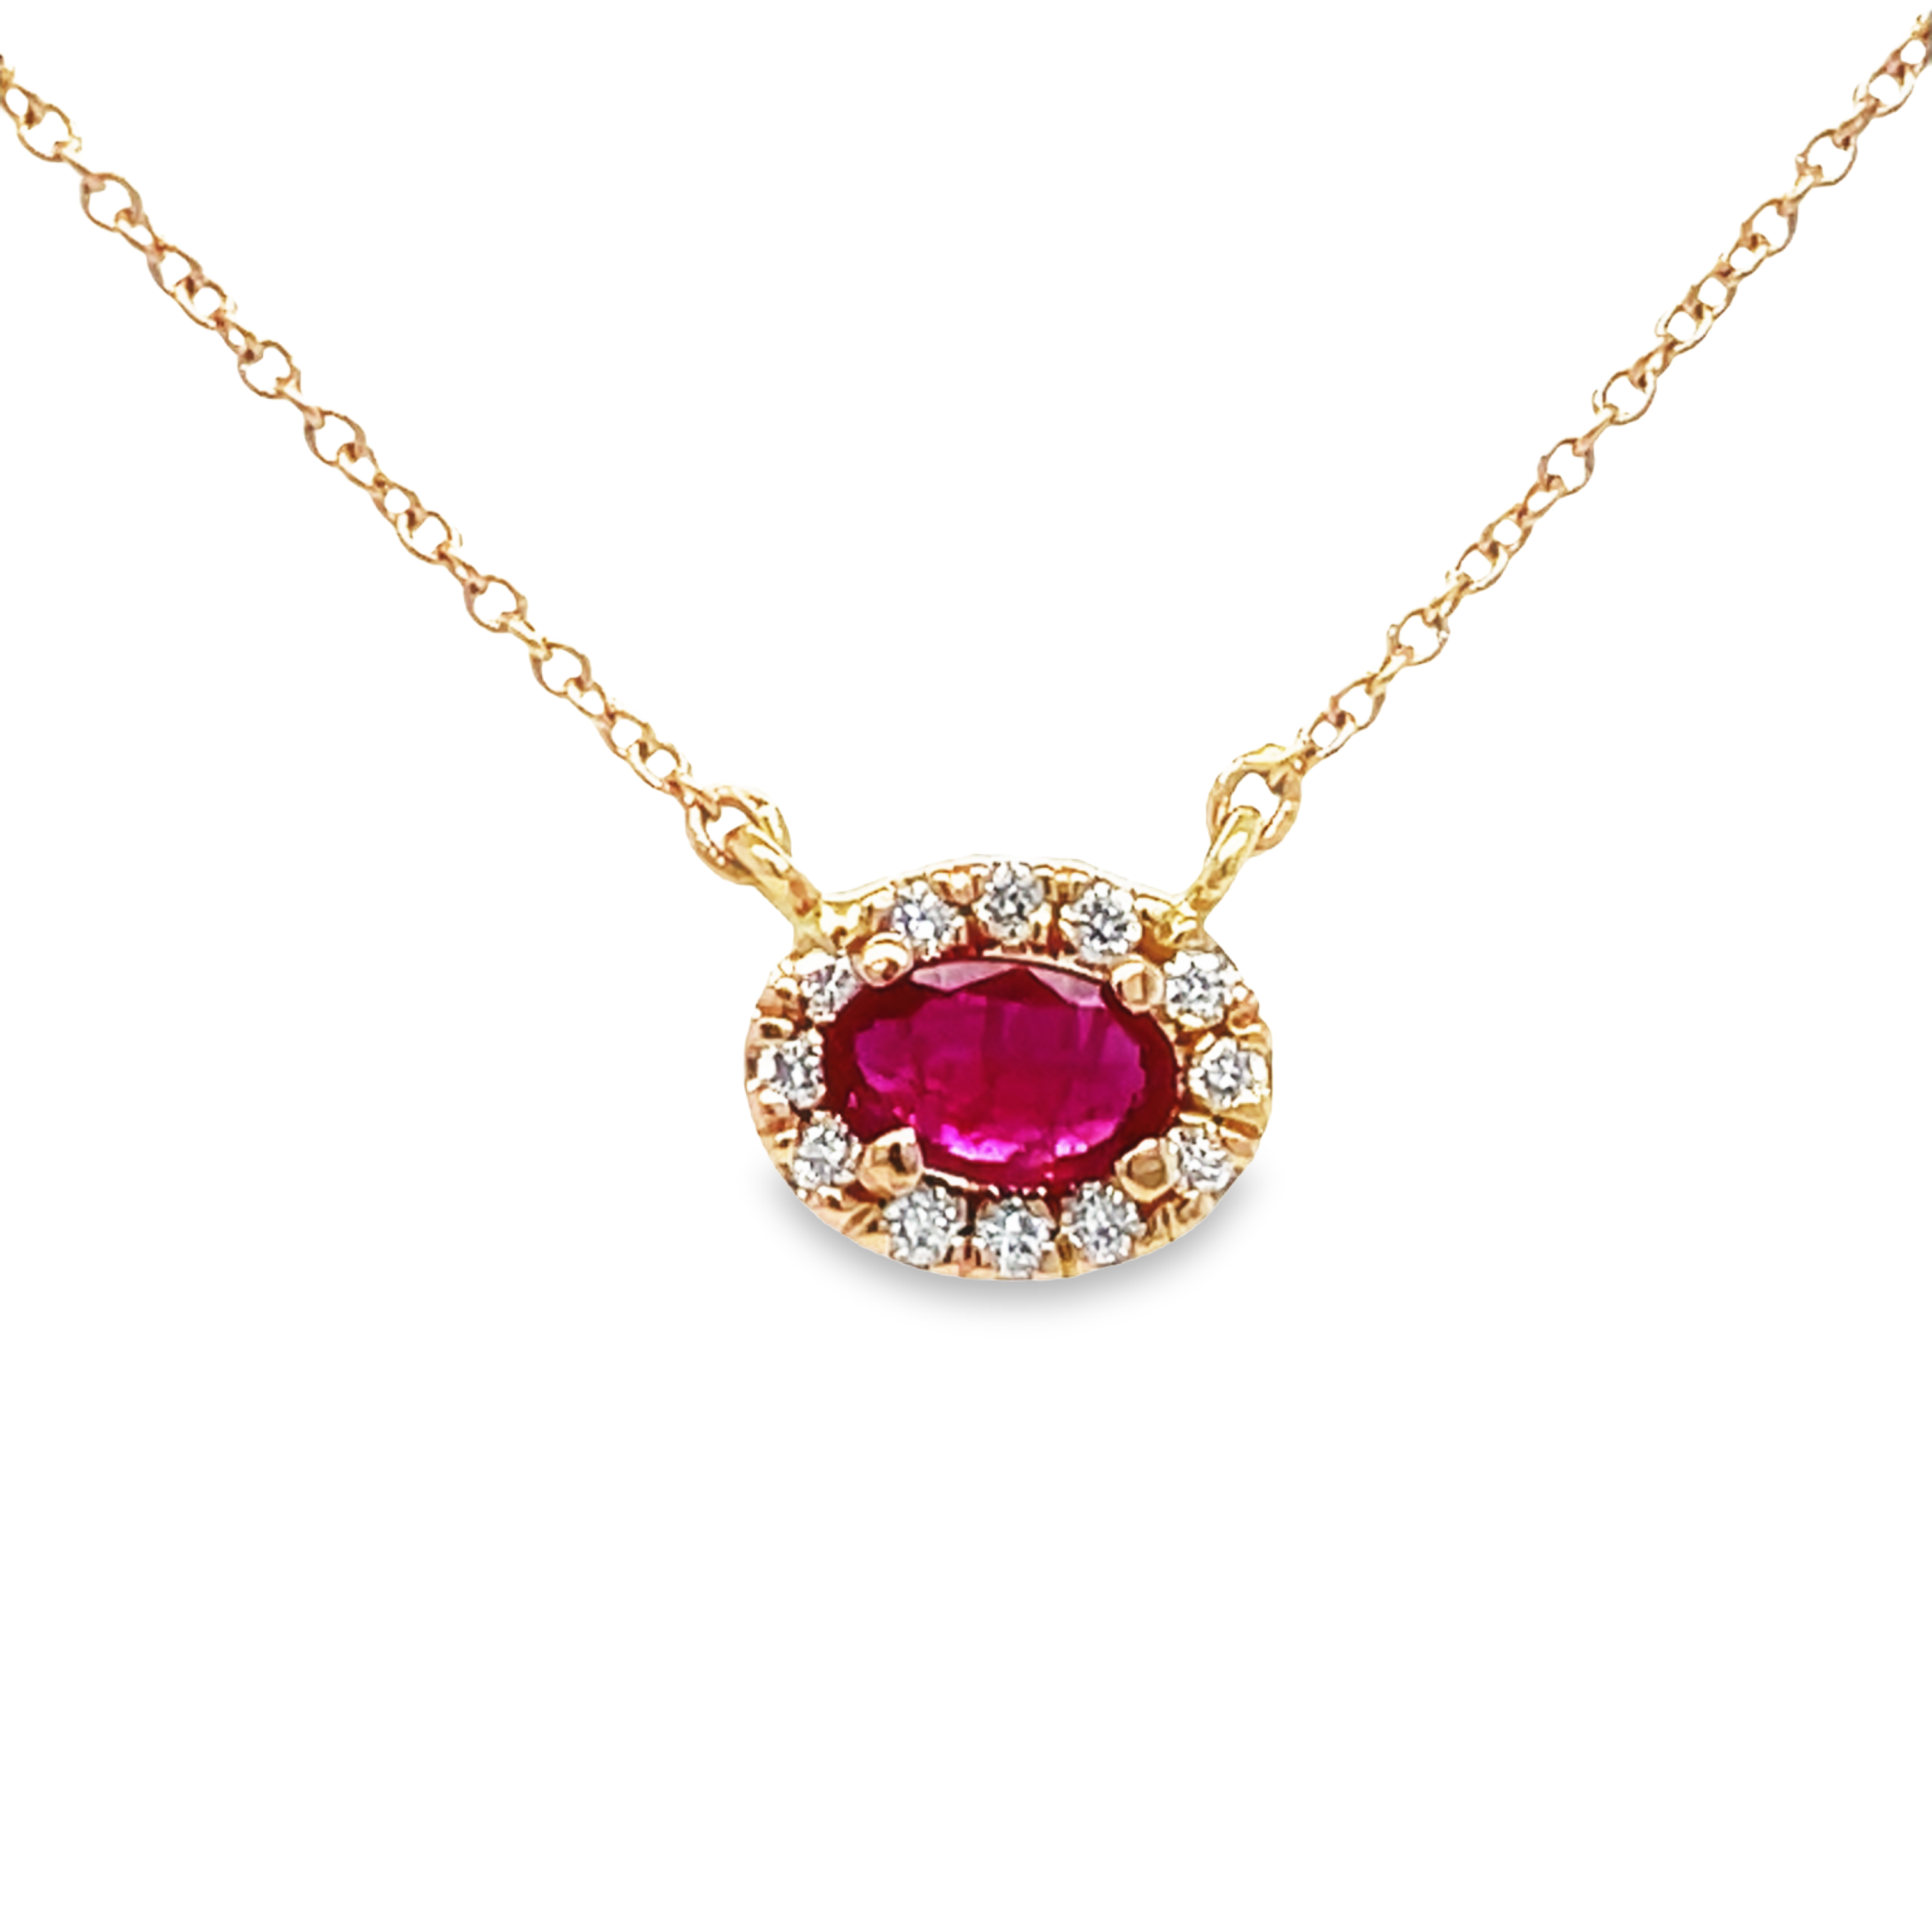 This exquisite Diamond Bezel Horizontal Oval Ruby Necklace features a stunning 0.55 ct oval ruby enhanced by a 0.20 ct diamond bezel, all set in beautiful rose gold. The 16" length of the necklace ensures a truly eye-catching look, perfect for any special occasion